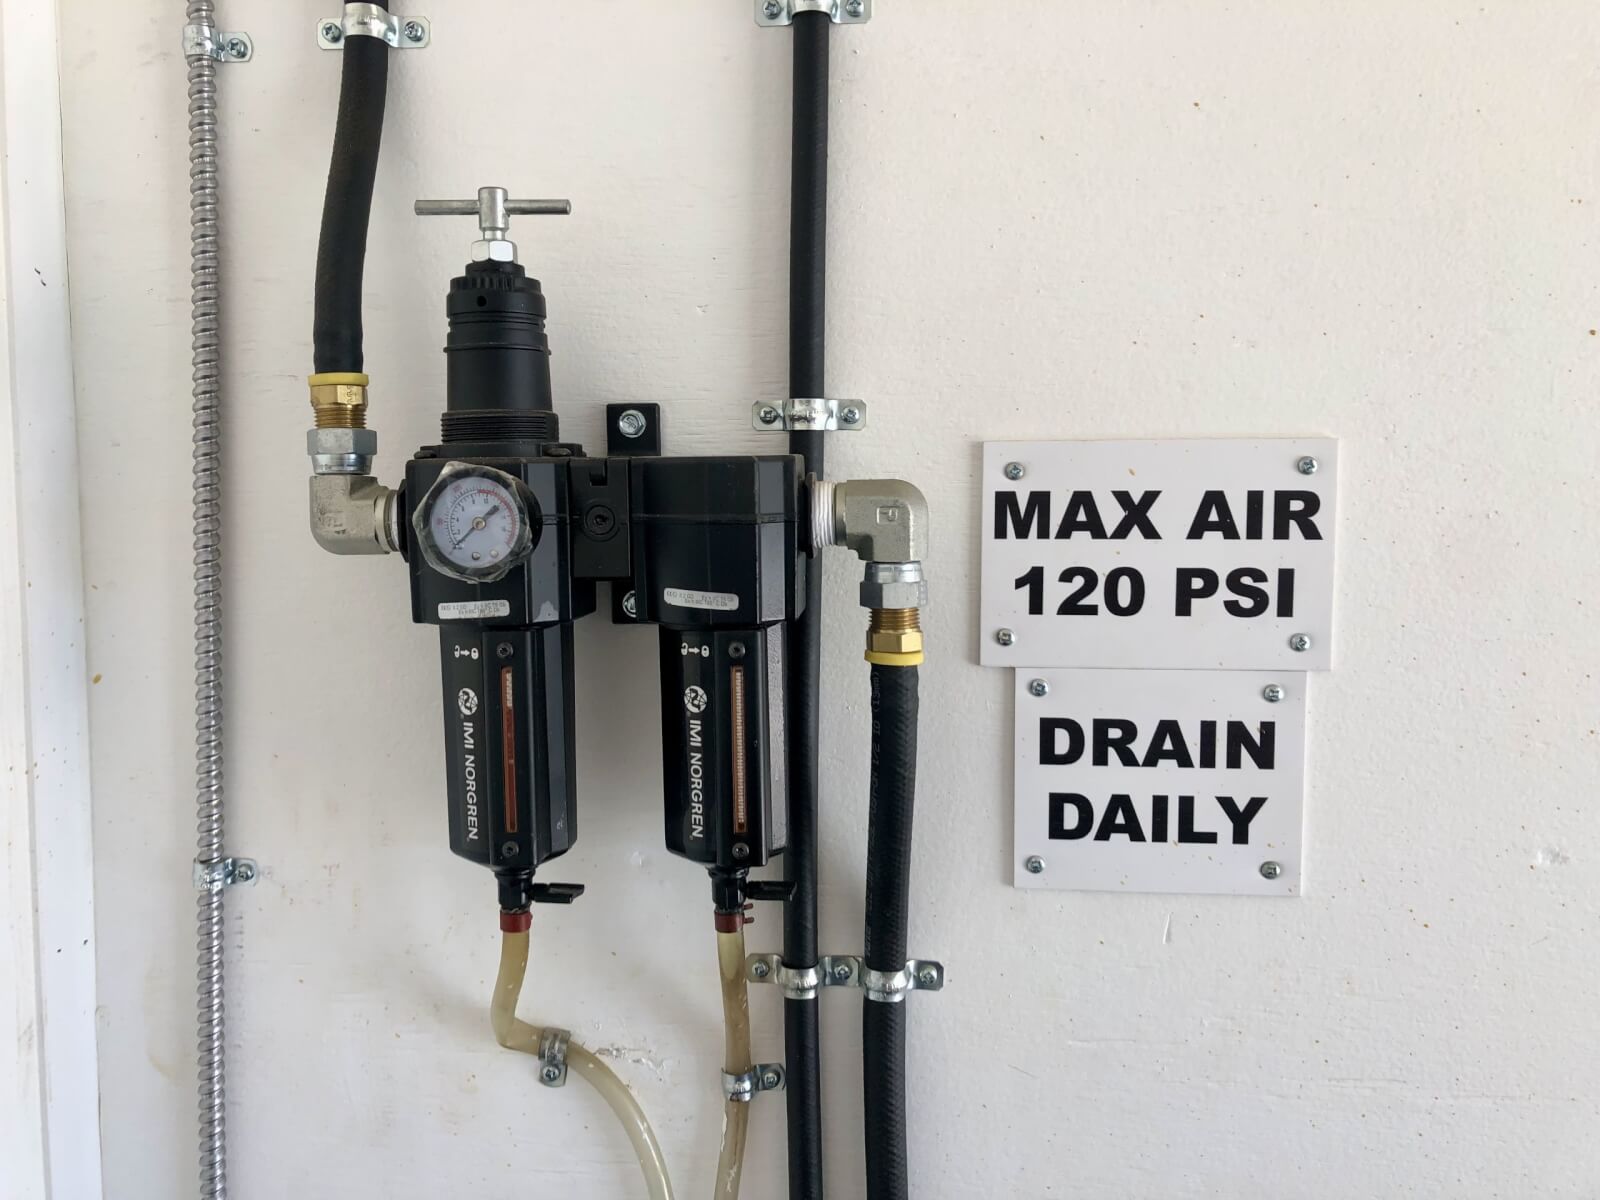 Spray Foam Rig Pressure gauge with Max PSI sign